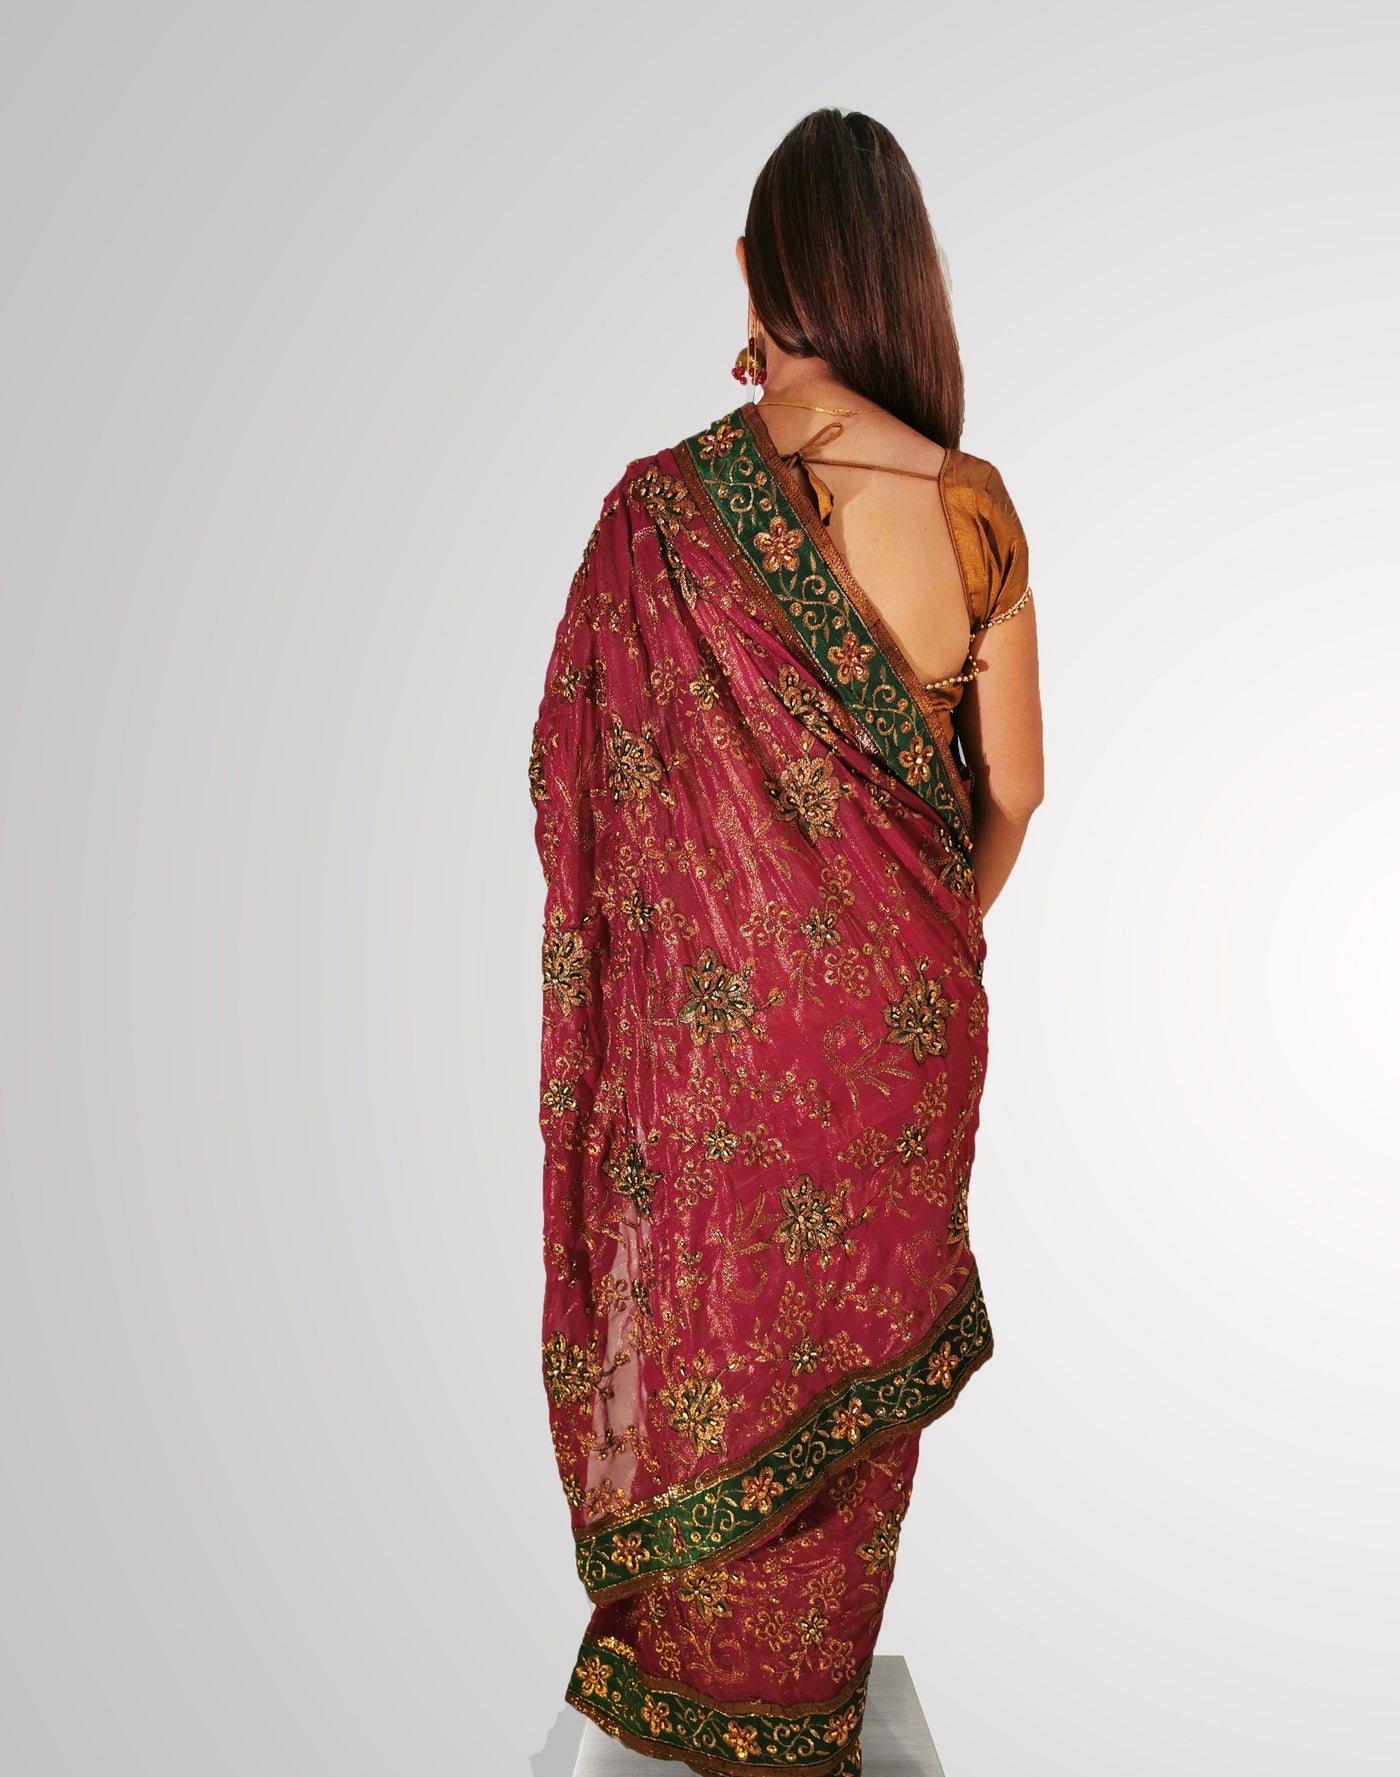 Saree in Smooth Shimmering Purple Silk with Green Border Trim - Indian Clothing in Denver, CO, Aurora, CO, Boulder, CO, Fort Collins, CO, Colorado Springs, CO, Parker, CO, Highlands Ranch, CO, Cherry Creek, CO, Centennial, CO, and Longmont, CO. Nationwide shipping USA - India Fashion X